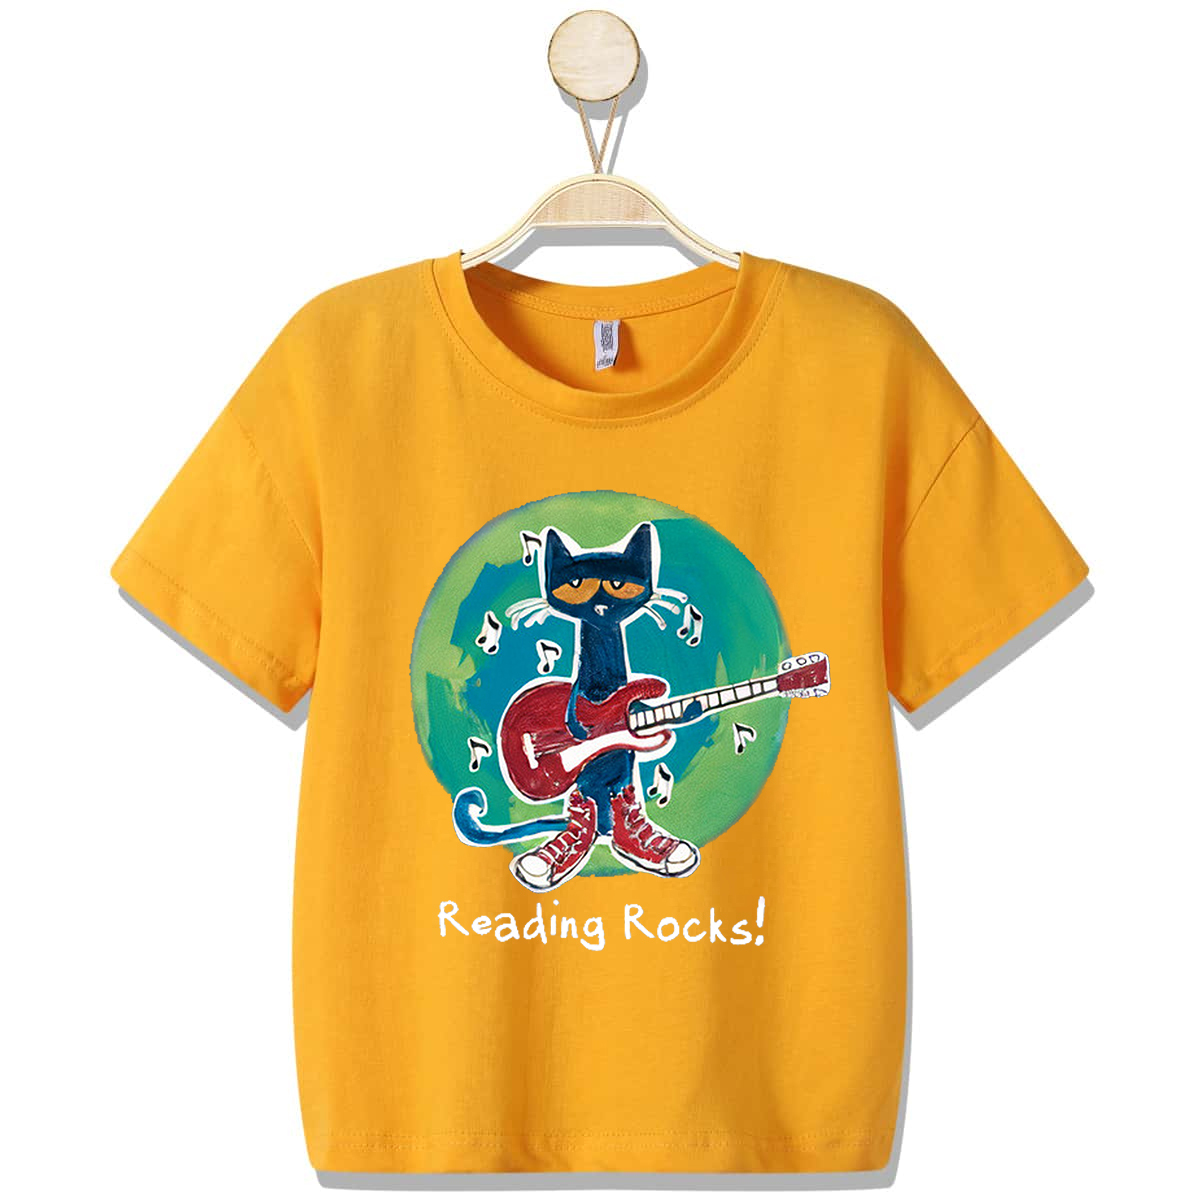 Pete The Cat reading book Shirt, If You Want To Be Cool Just Be You T-shirt, Its All Groovy, Cool Cat, funny pete the cat shirt